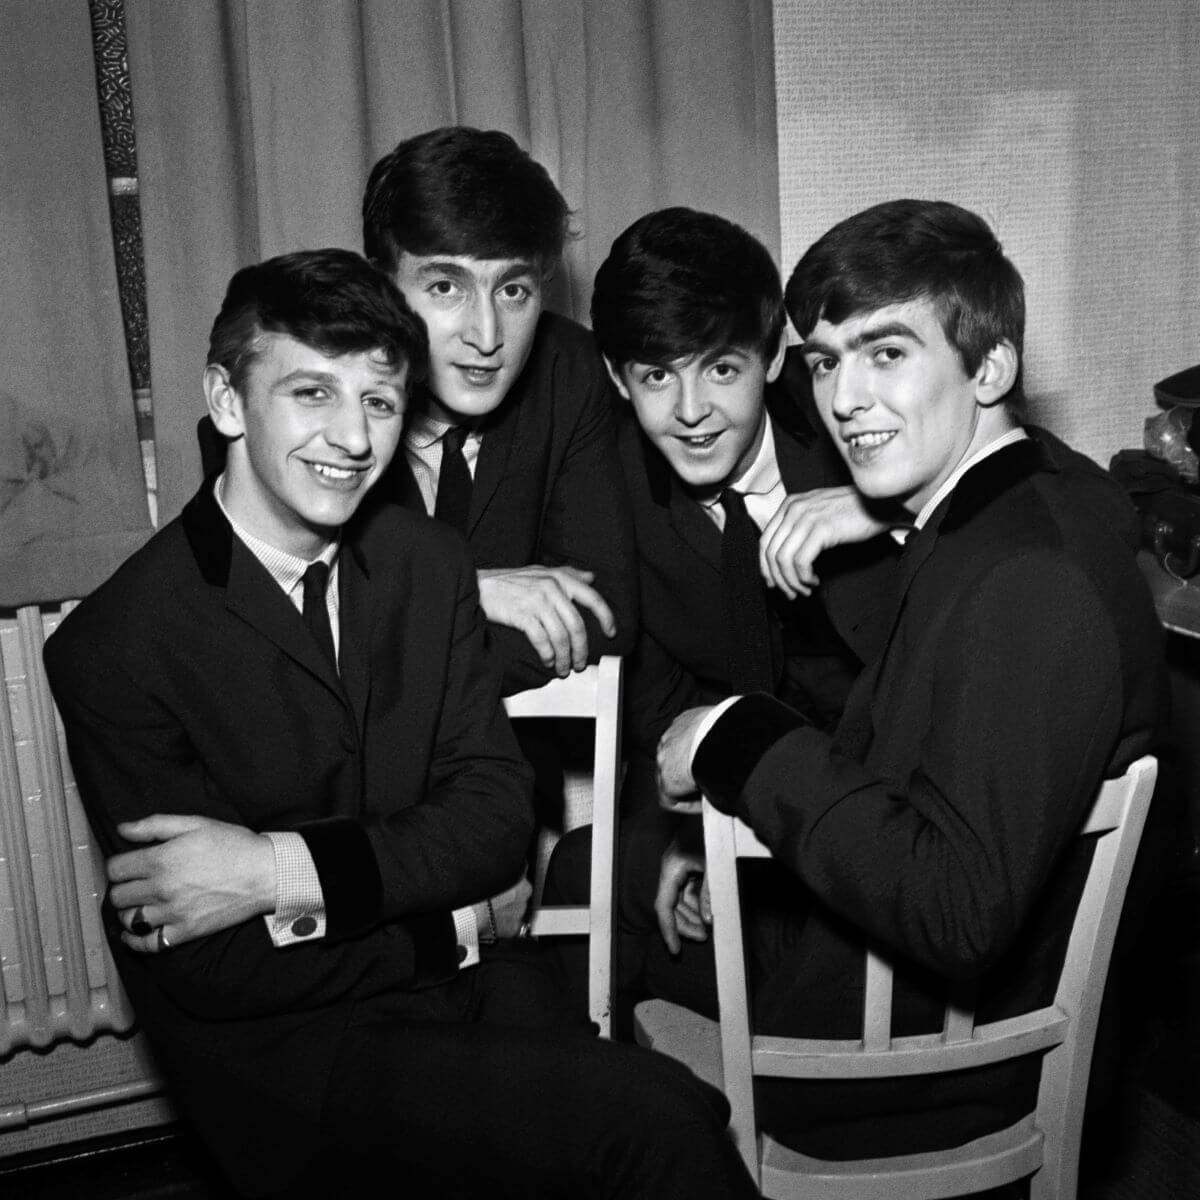 A black and white picture of Ringo Starr, John Lennon, Paul McCartney, and George Harrison of The Beatles gathered together on chairs. They wear suits.